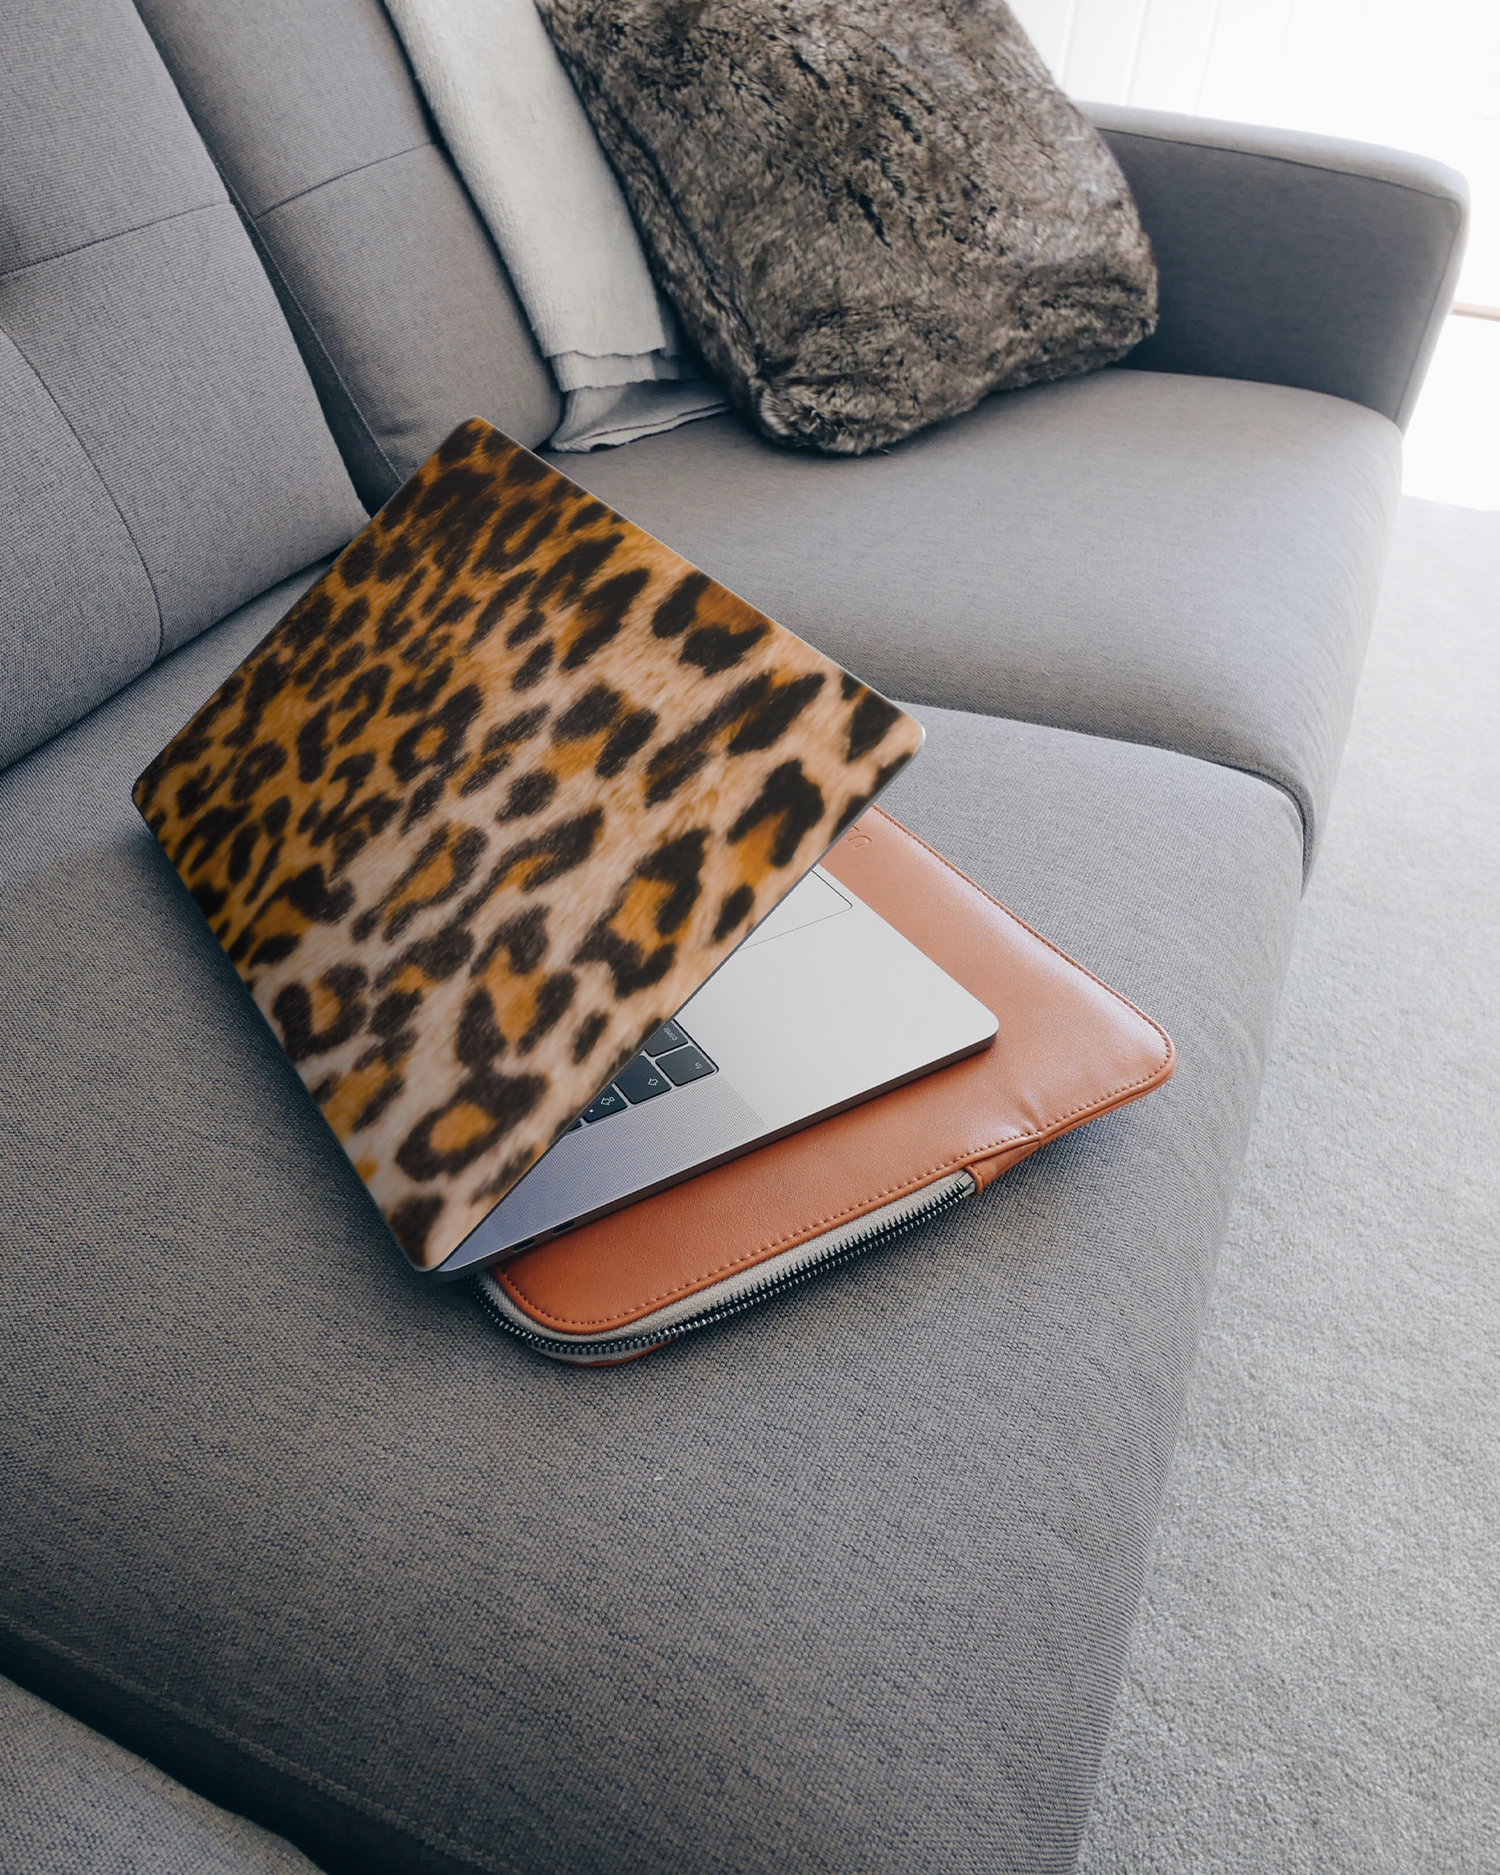 Leopard Pattern Laptop Skin for 15 inch Apple MacBooks on a couch